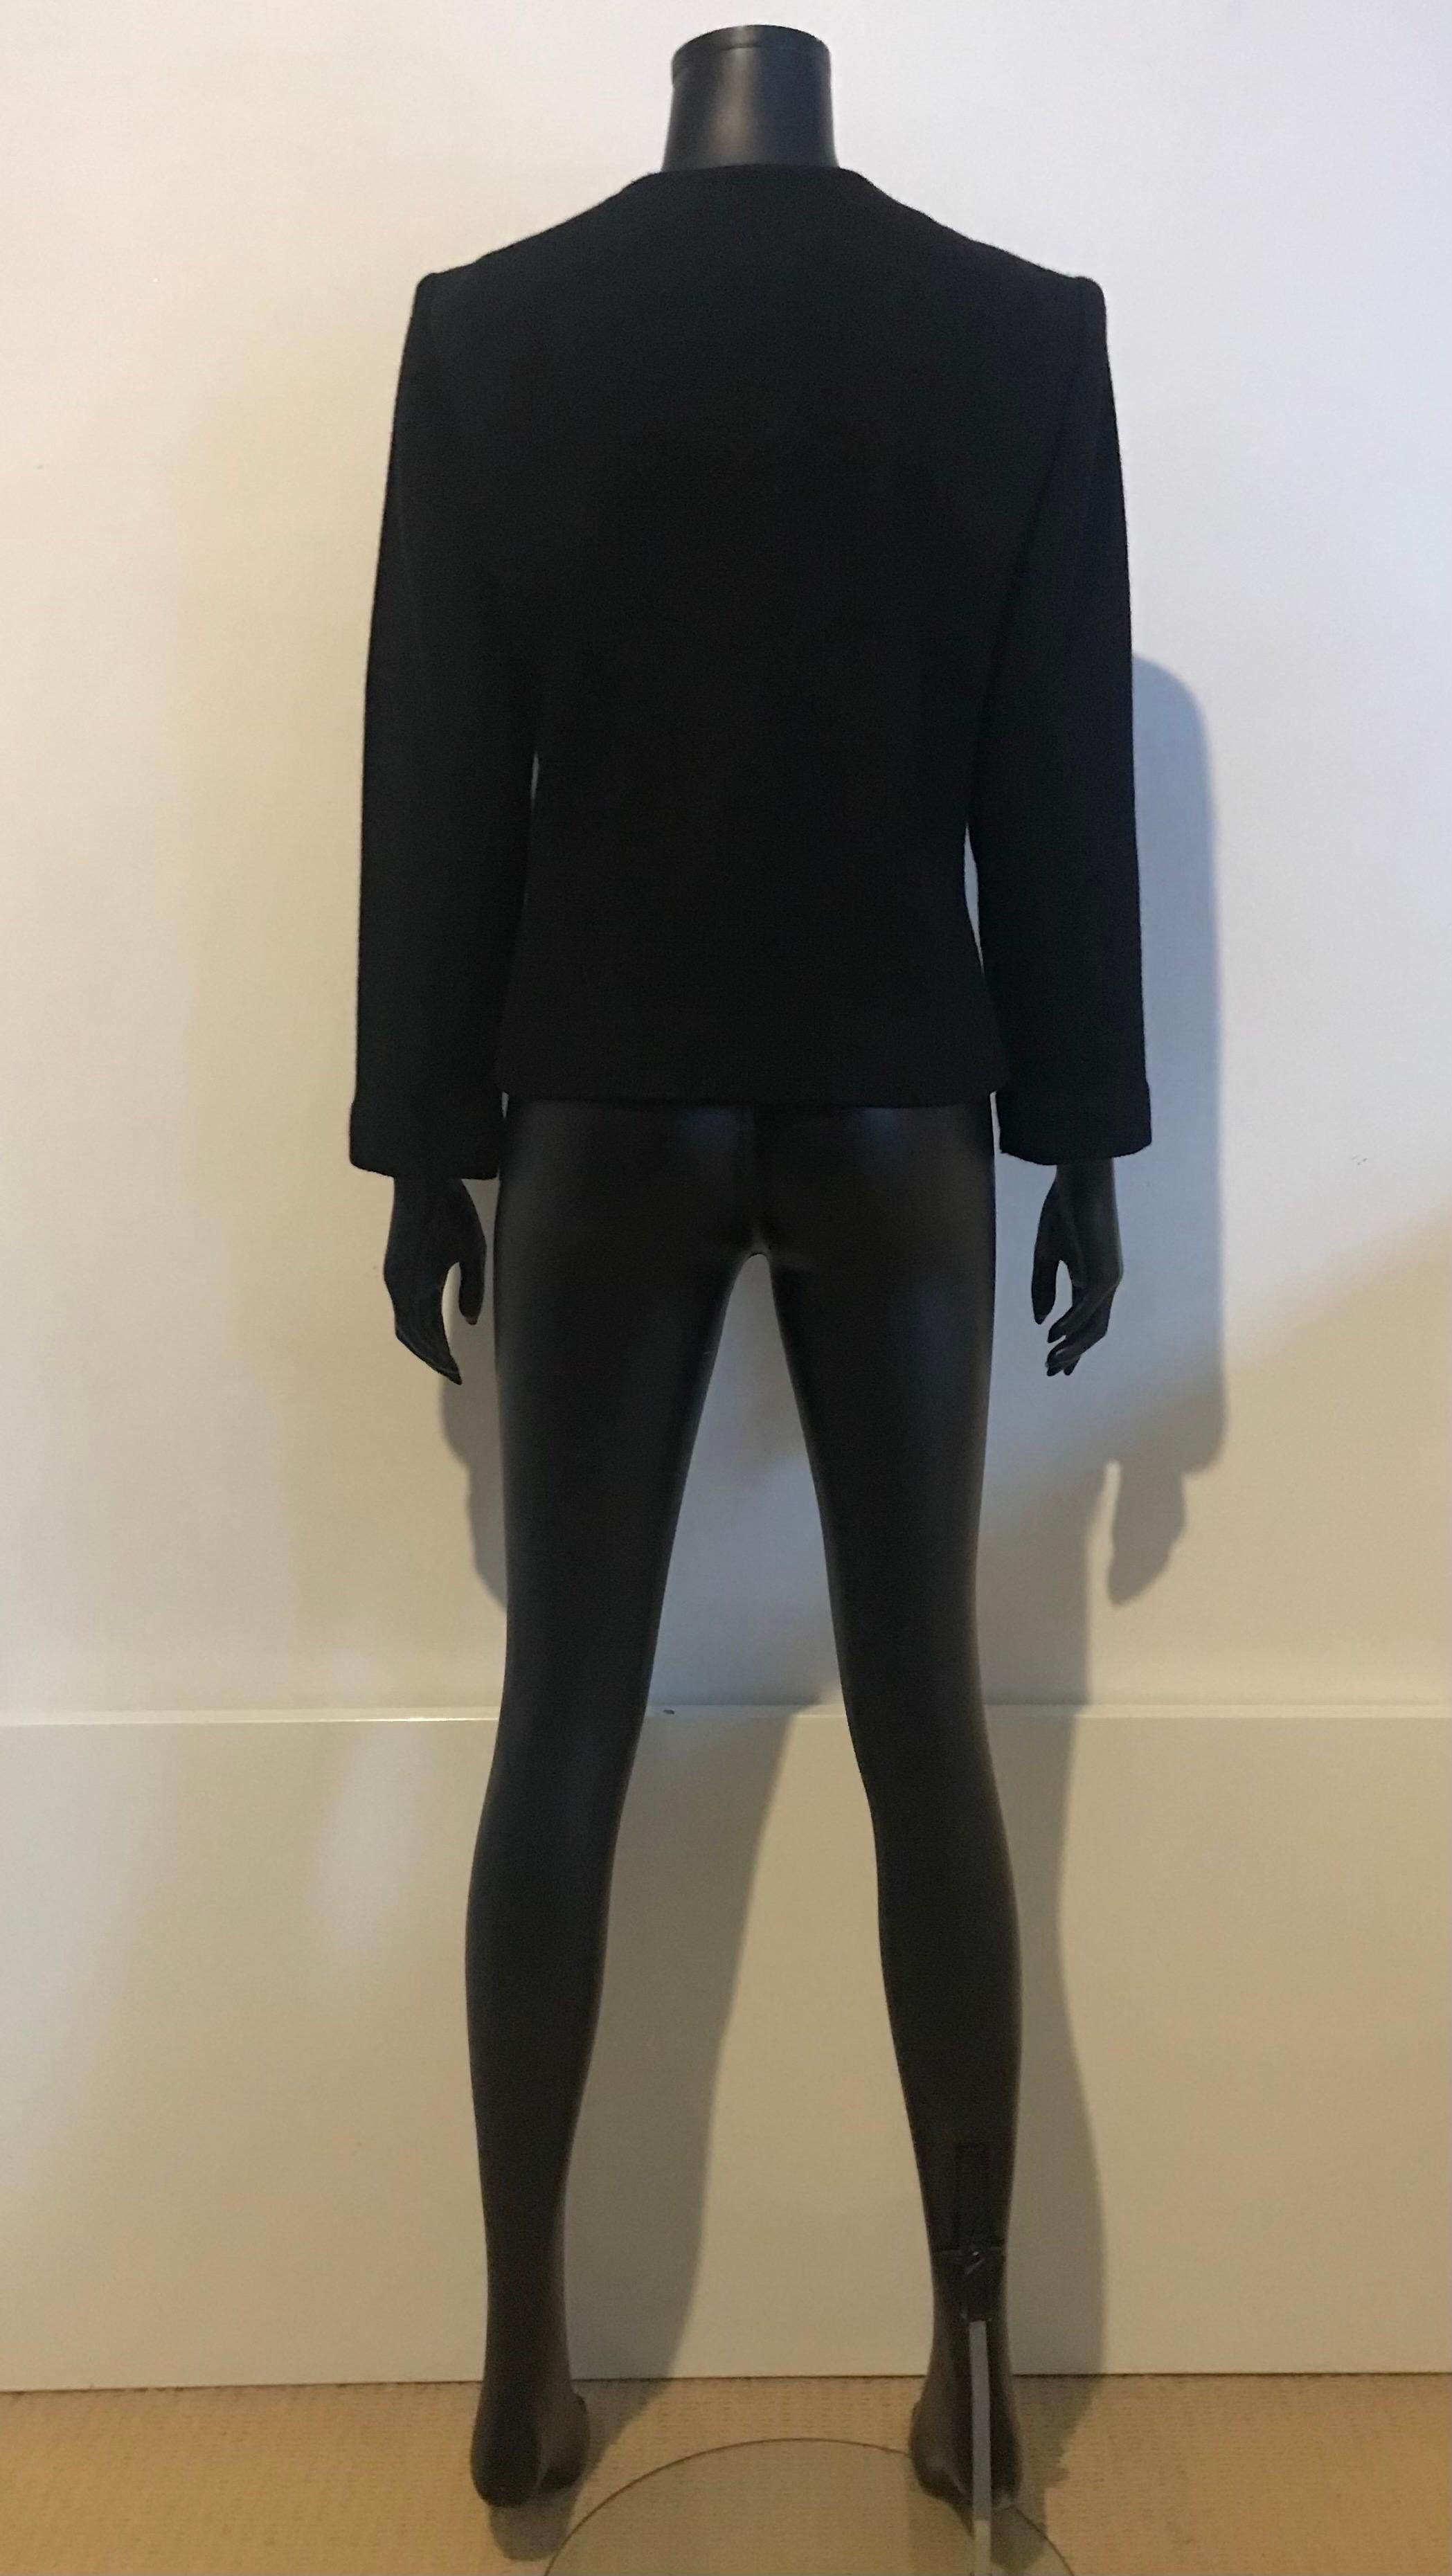 This beautiful vintage piece from an exciting era of Yves Saint Laurent Rive Gauche is a black brocade and ribbed knit evening jacket 

Flattering shape and classic YSL cut with oversized front button fastening detail 

From the mid 1970’s 

Fully